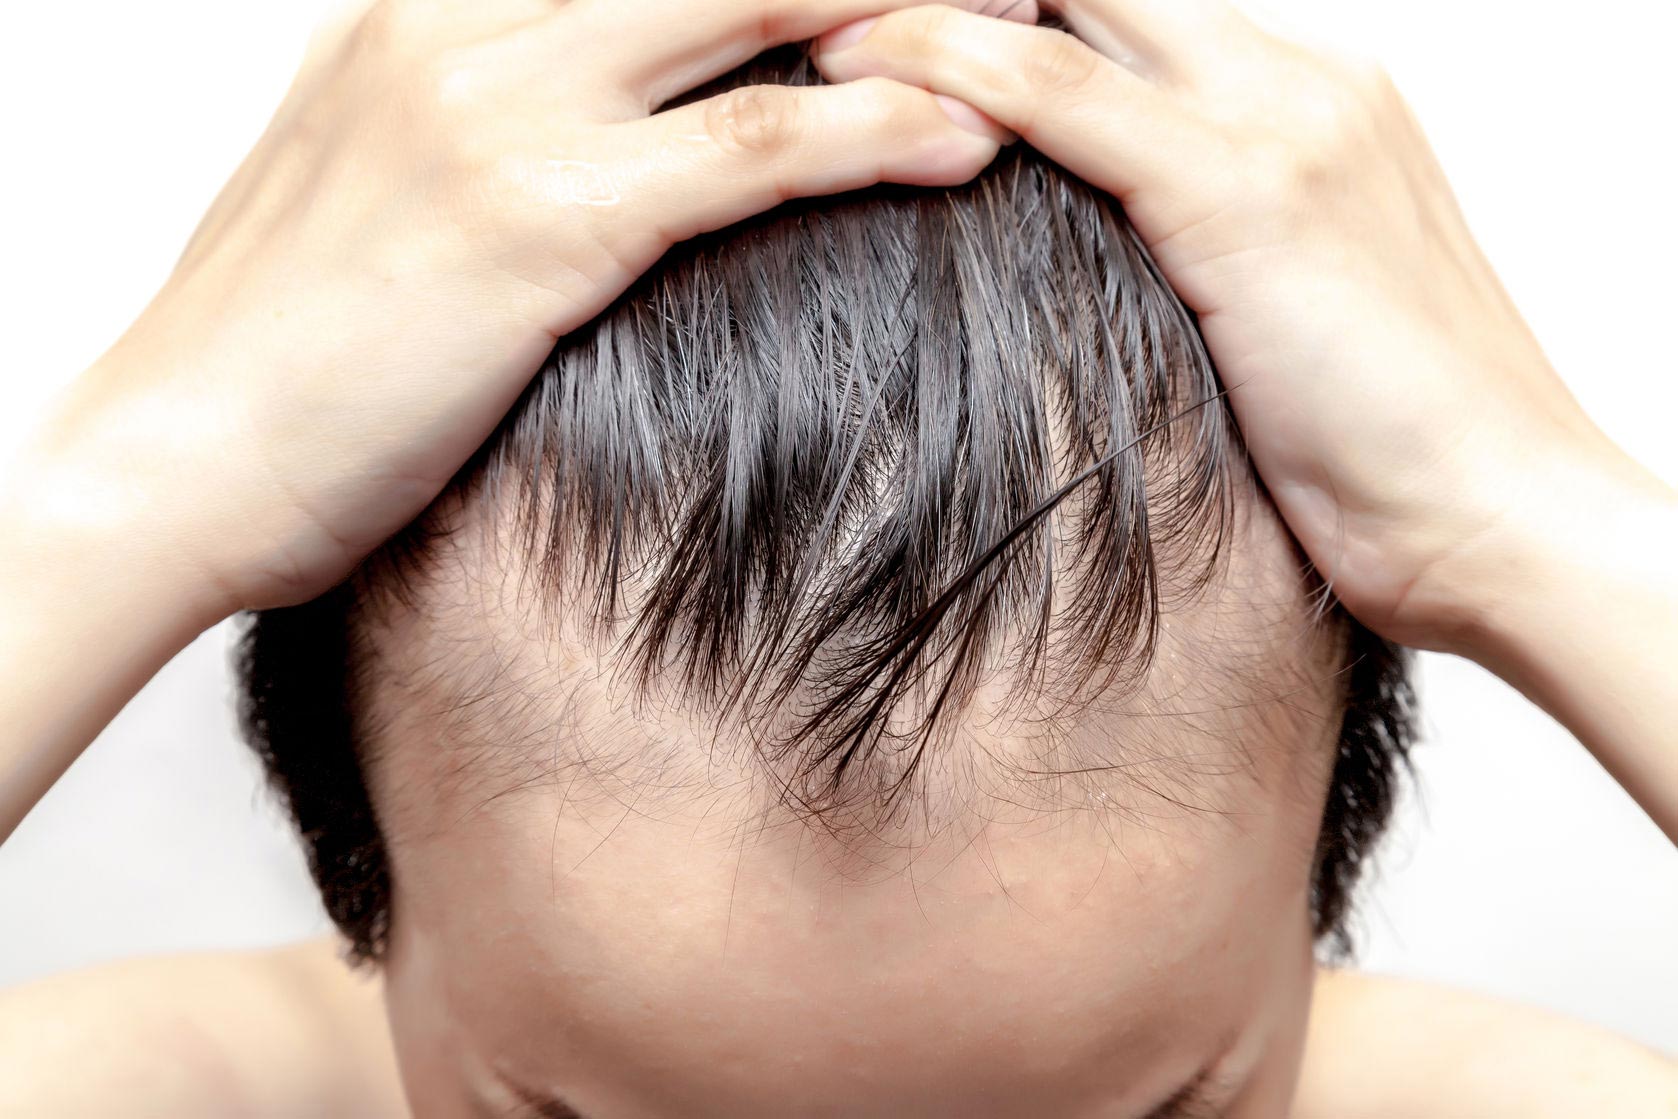 Is There a Cure for Male Pattern Baldness?